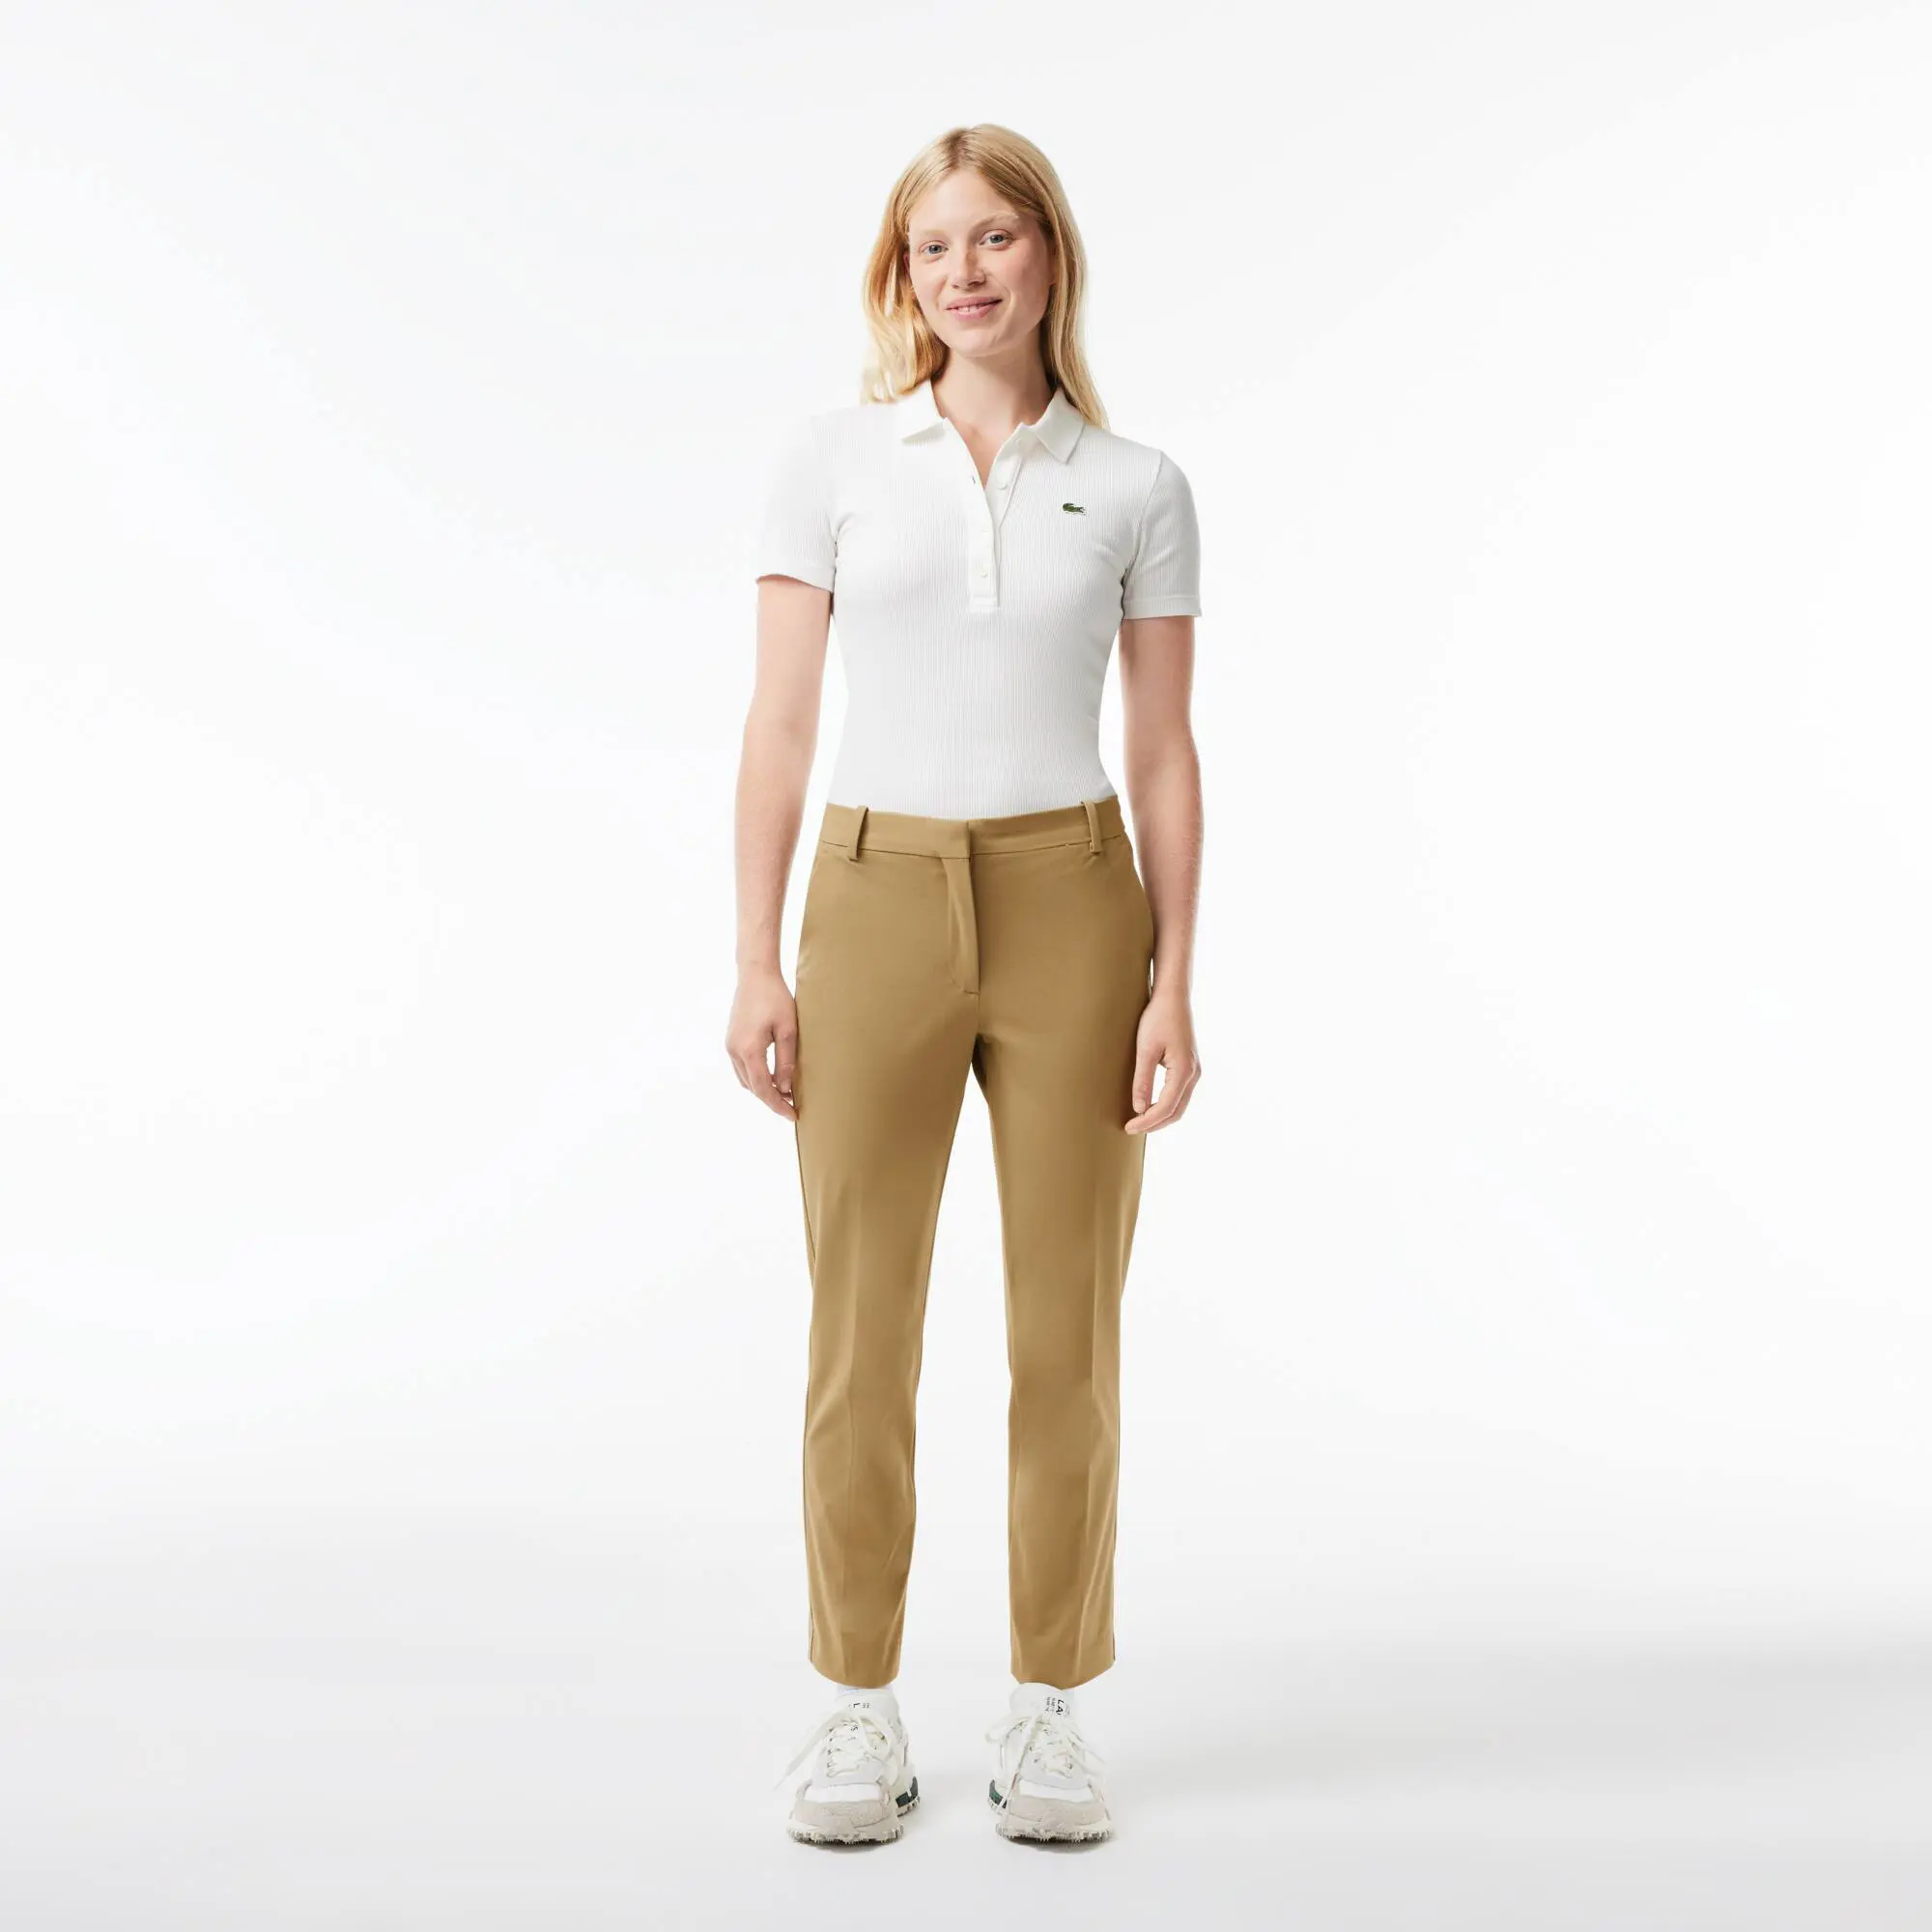 Lacoste Women's Slim Fit Stretch Cotton Chinos. 1